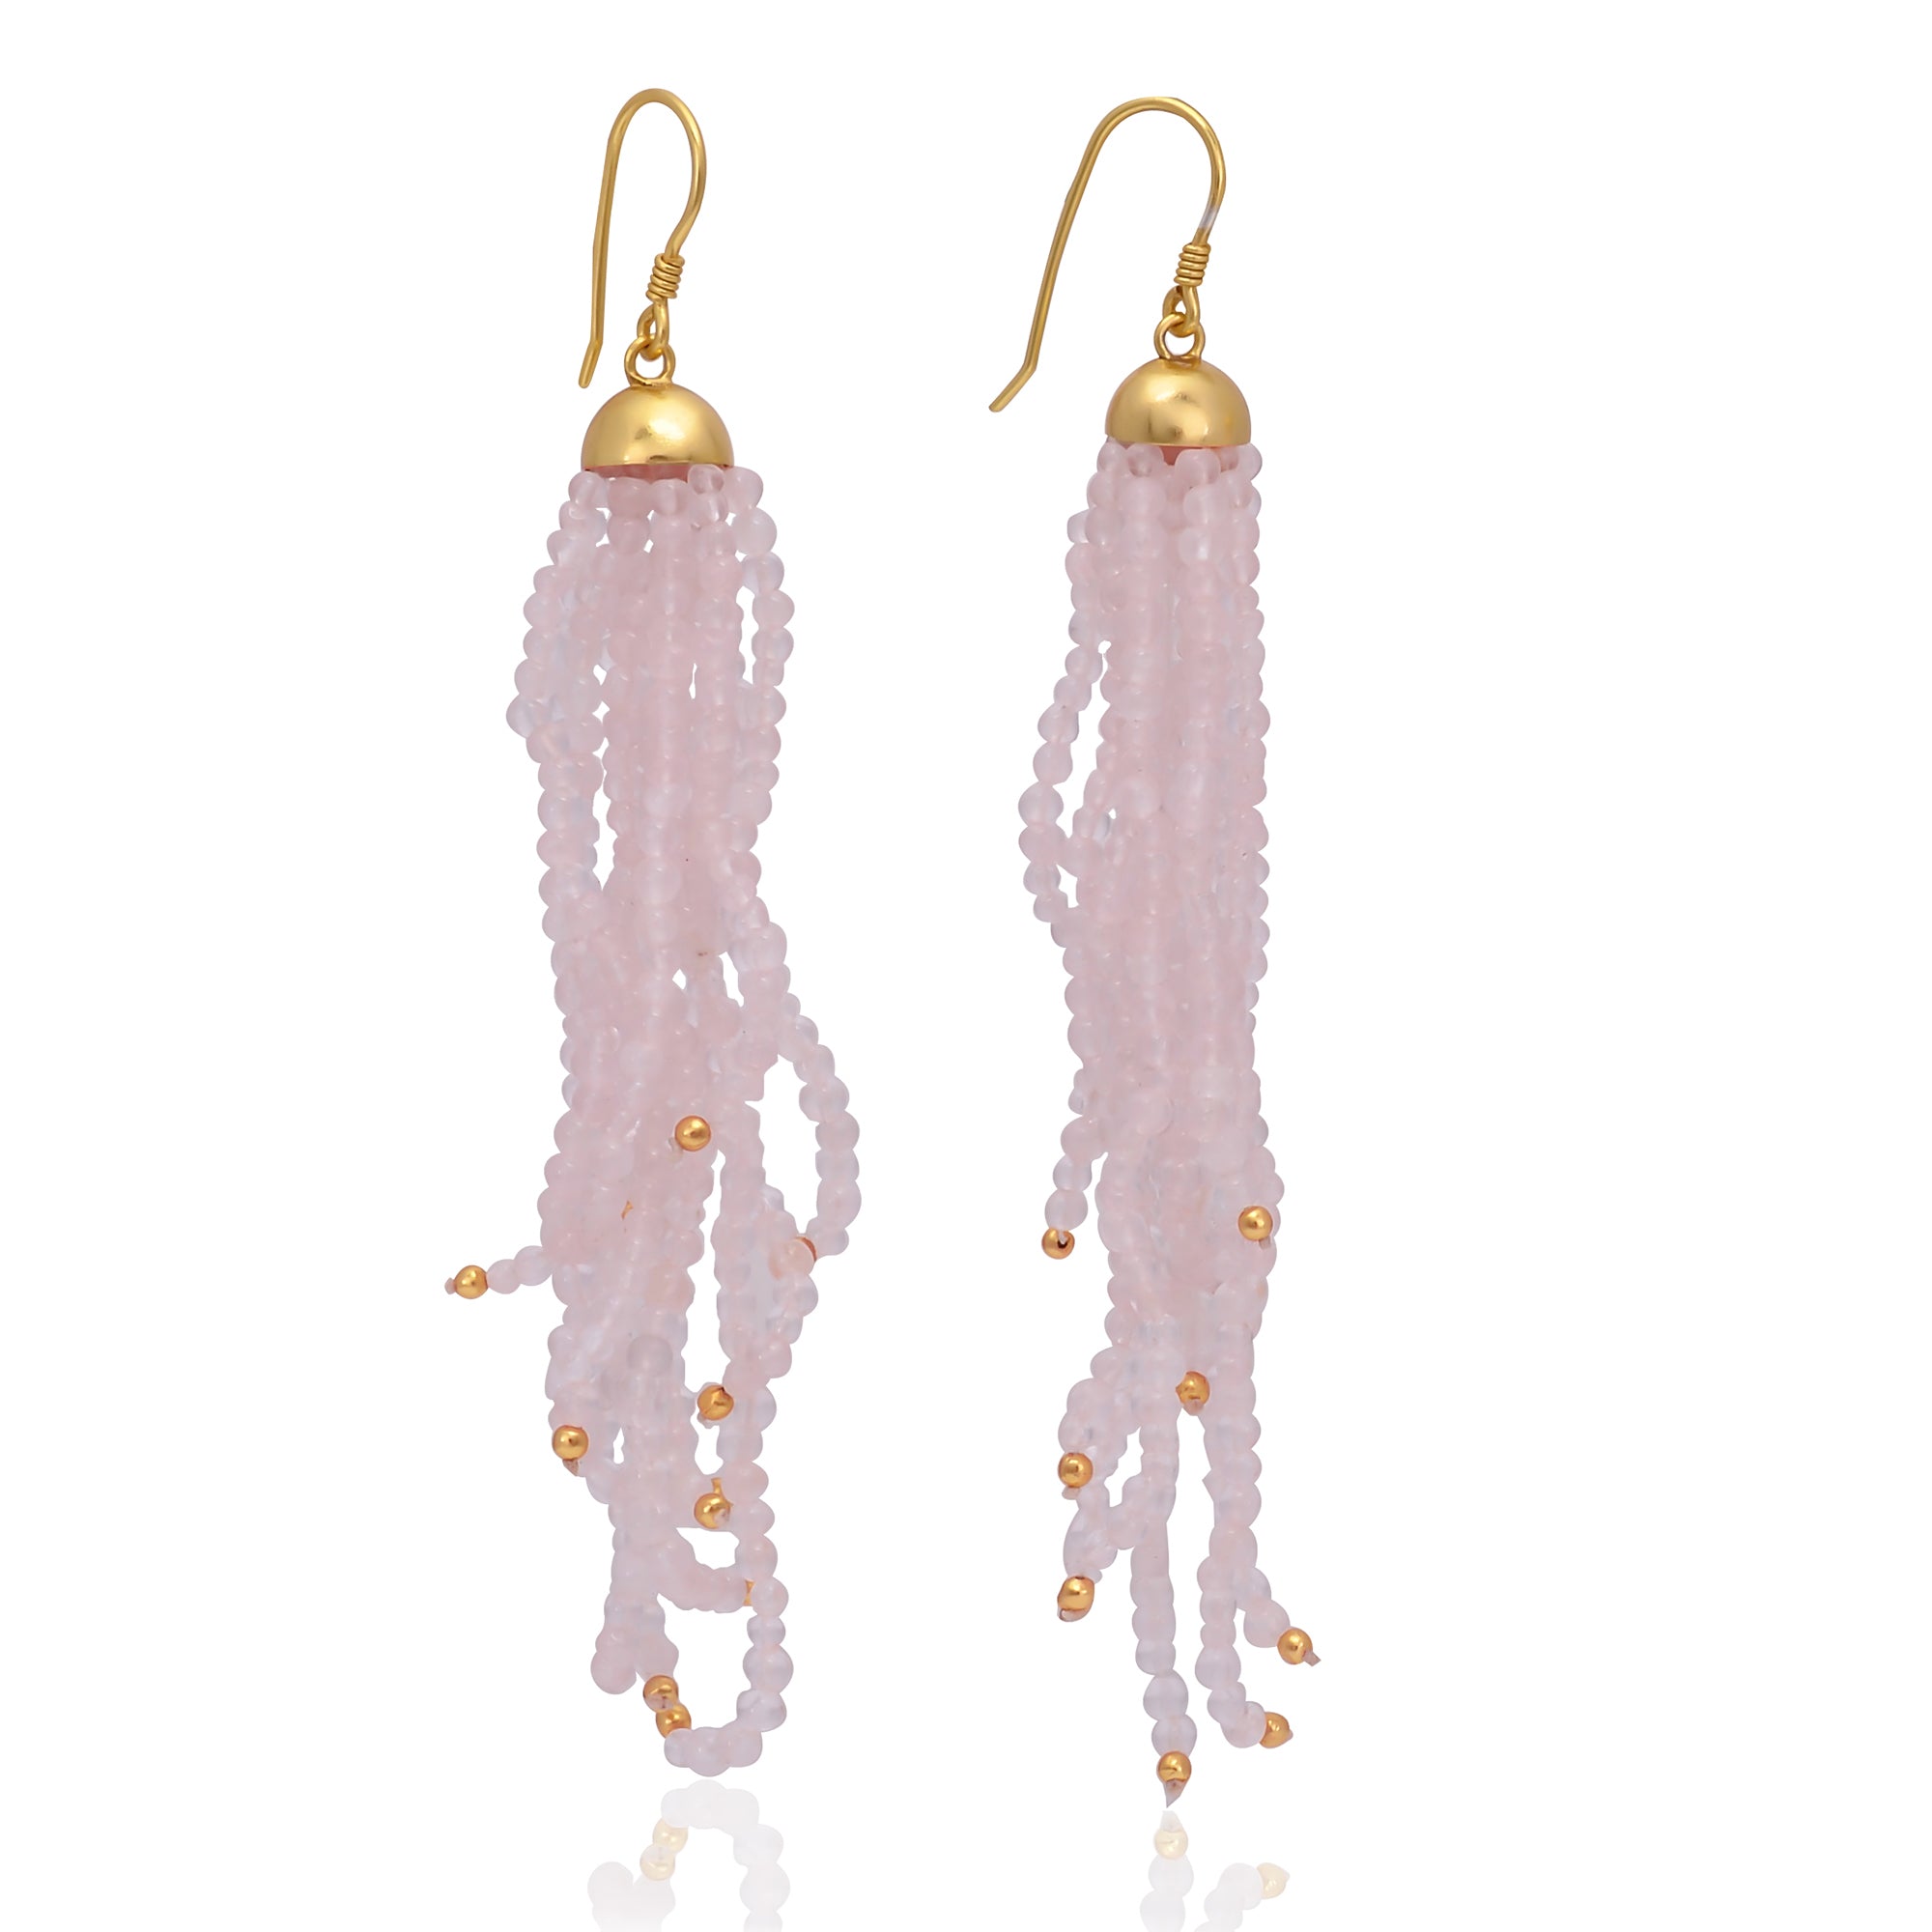 Silver Gold Plated Rose Quartz Earring